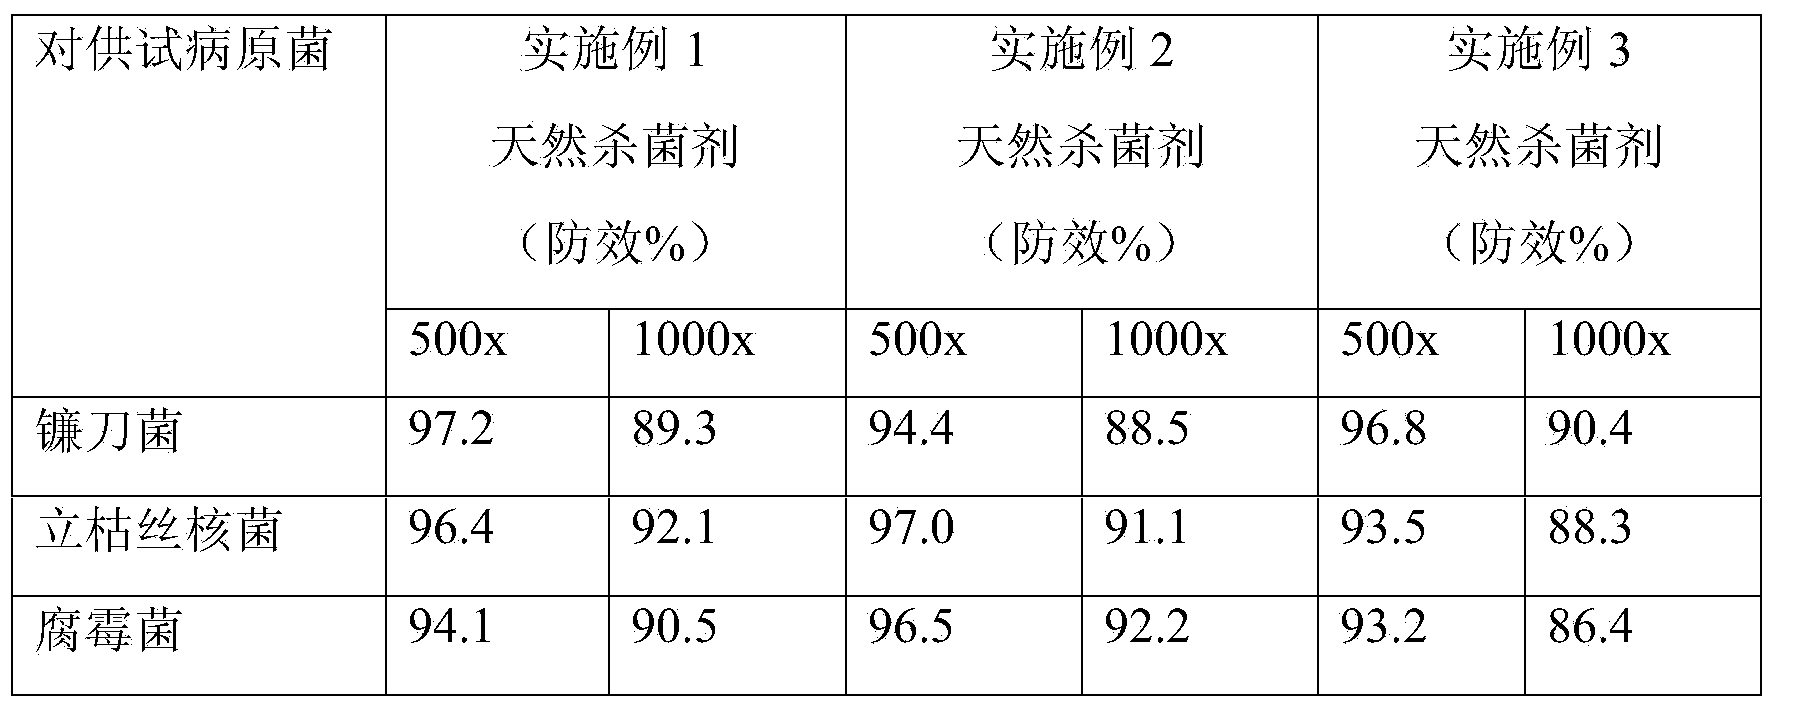 Natural bactericide for preventing and treating ginkgo nursery stock damping-off and preparation method thereof